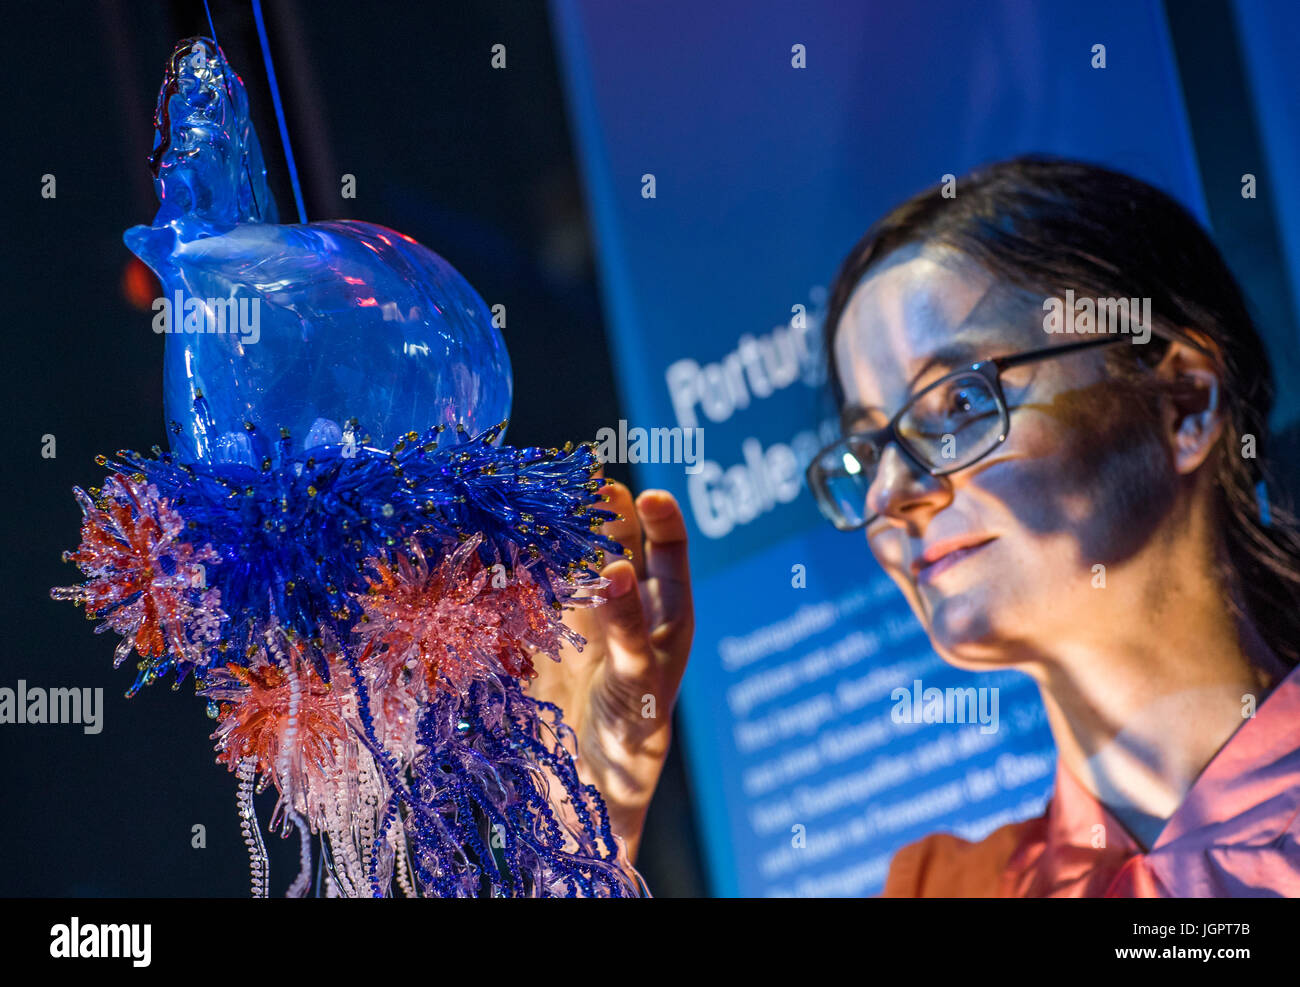 Artist Susan Liebold putting together the coloured glass replica of a siphonophora at the Ozeanum in Stralsund, Germany, 28 June 2017. The replica of the oceanic life-form also known as the Portuguese man o'war consists of a total of 700 parts. Siphonophorae are colonies of hundreds of individual organisms, native to the tropical seas and are some of the most poisonous organisms in the ocean. The glass siphonophora can be marveled at at the Ozeanum, the natural science museum focused on the sea belonging to the German Oceanographic Museum Foundation. Photo: Jens Büttner/dpa-Zentralbild/dpa Stock Photo